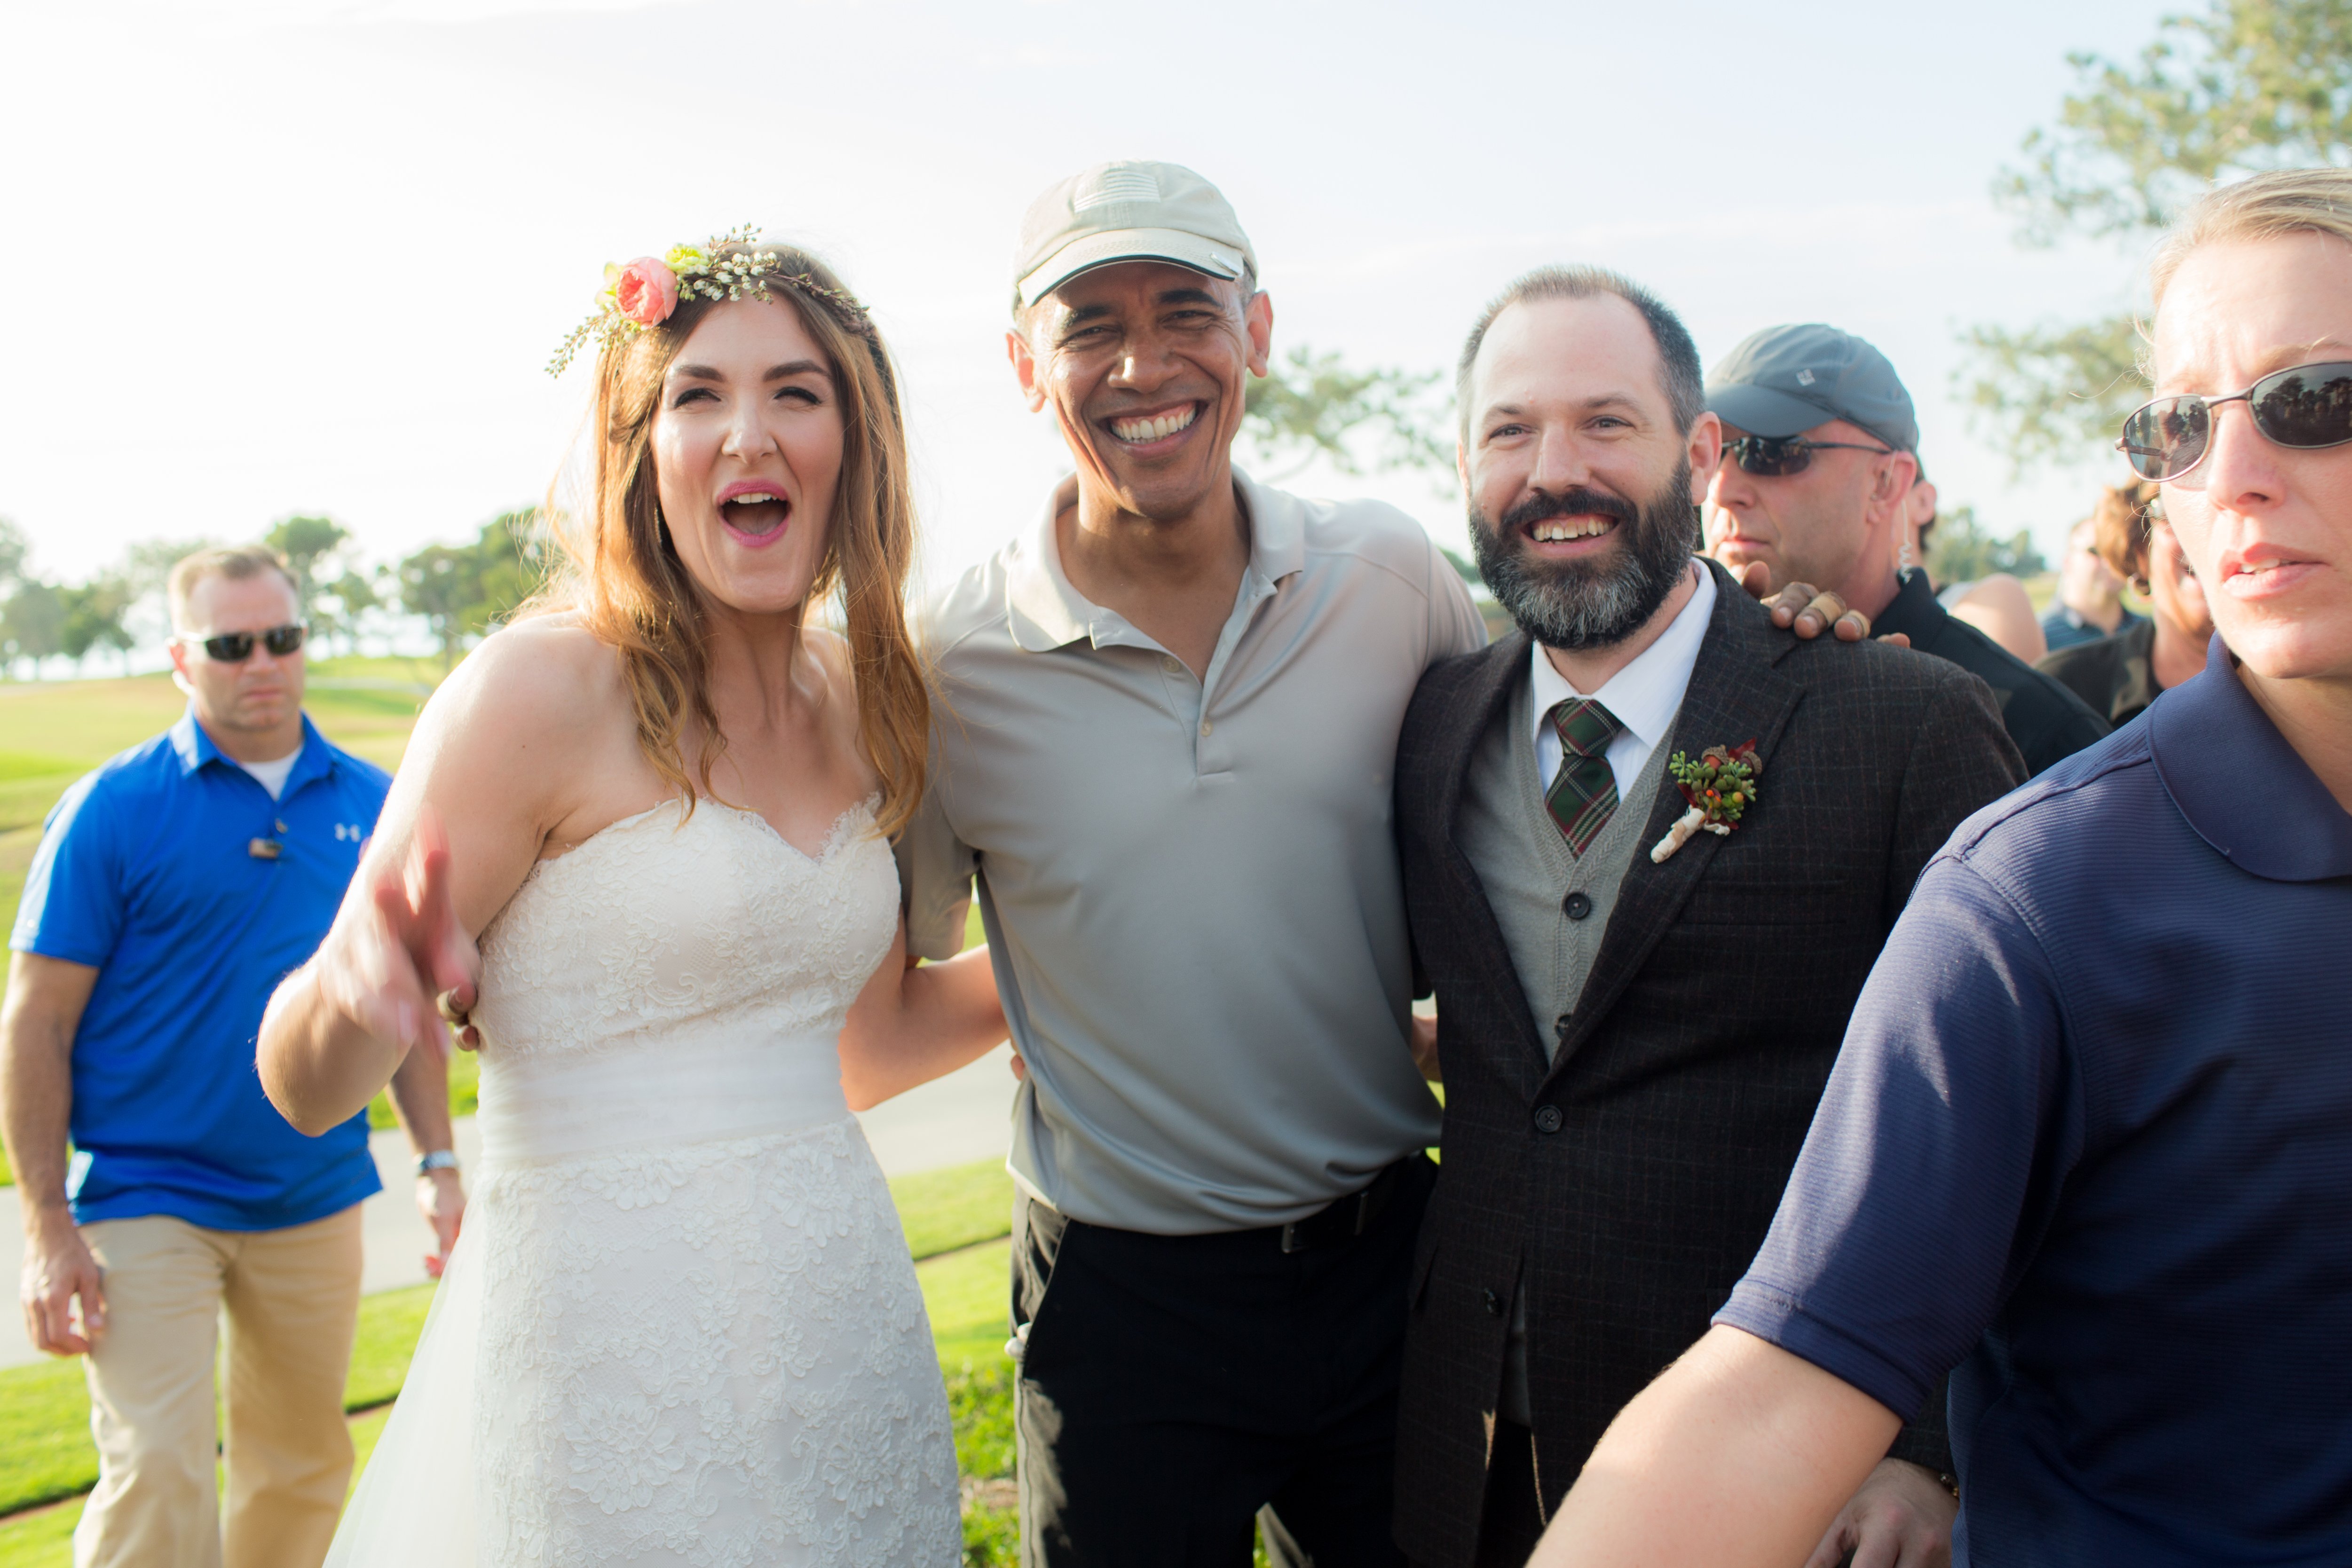 President Obama "crashed" a California wedding on Sunday, surprising the bride and groom with an appearance in their wedding photos.